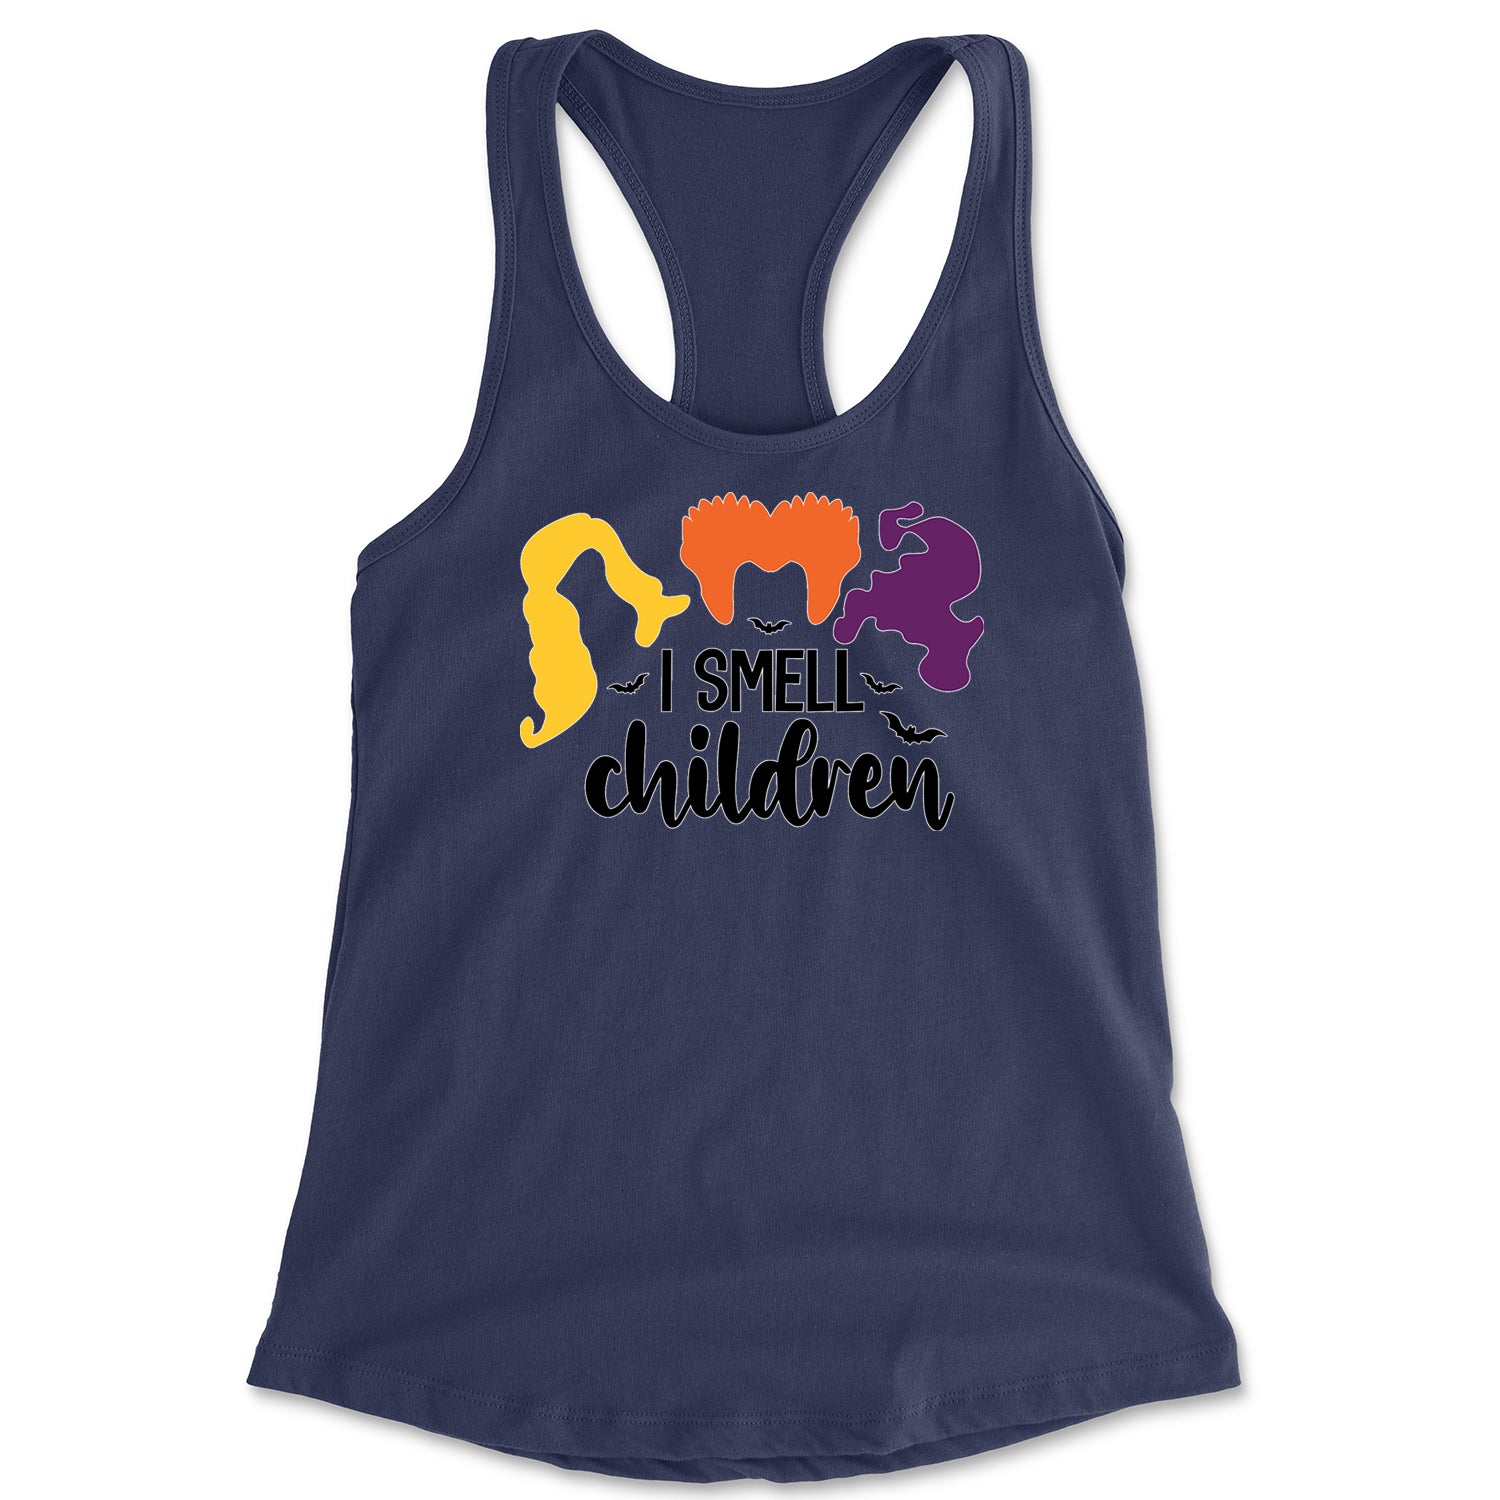 I Smell Children Hocus Pocus Racerback Tank Top for Women descendants, enchanted, eve, hallows, hocus, or, pocus, sanderson, sisters, treat, trick, witches by Expression Tees